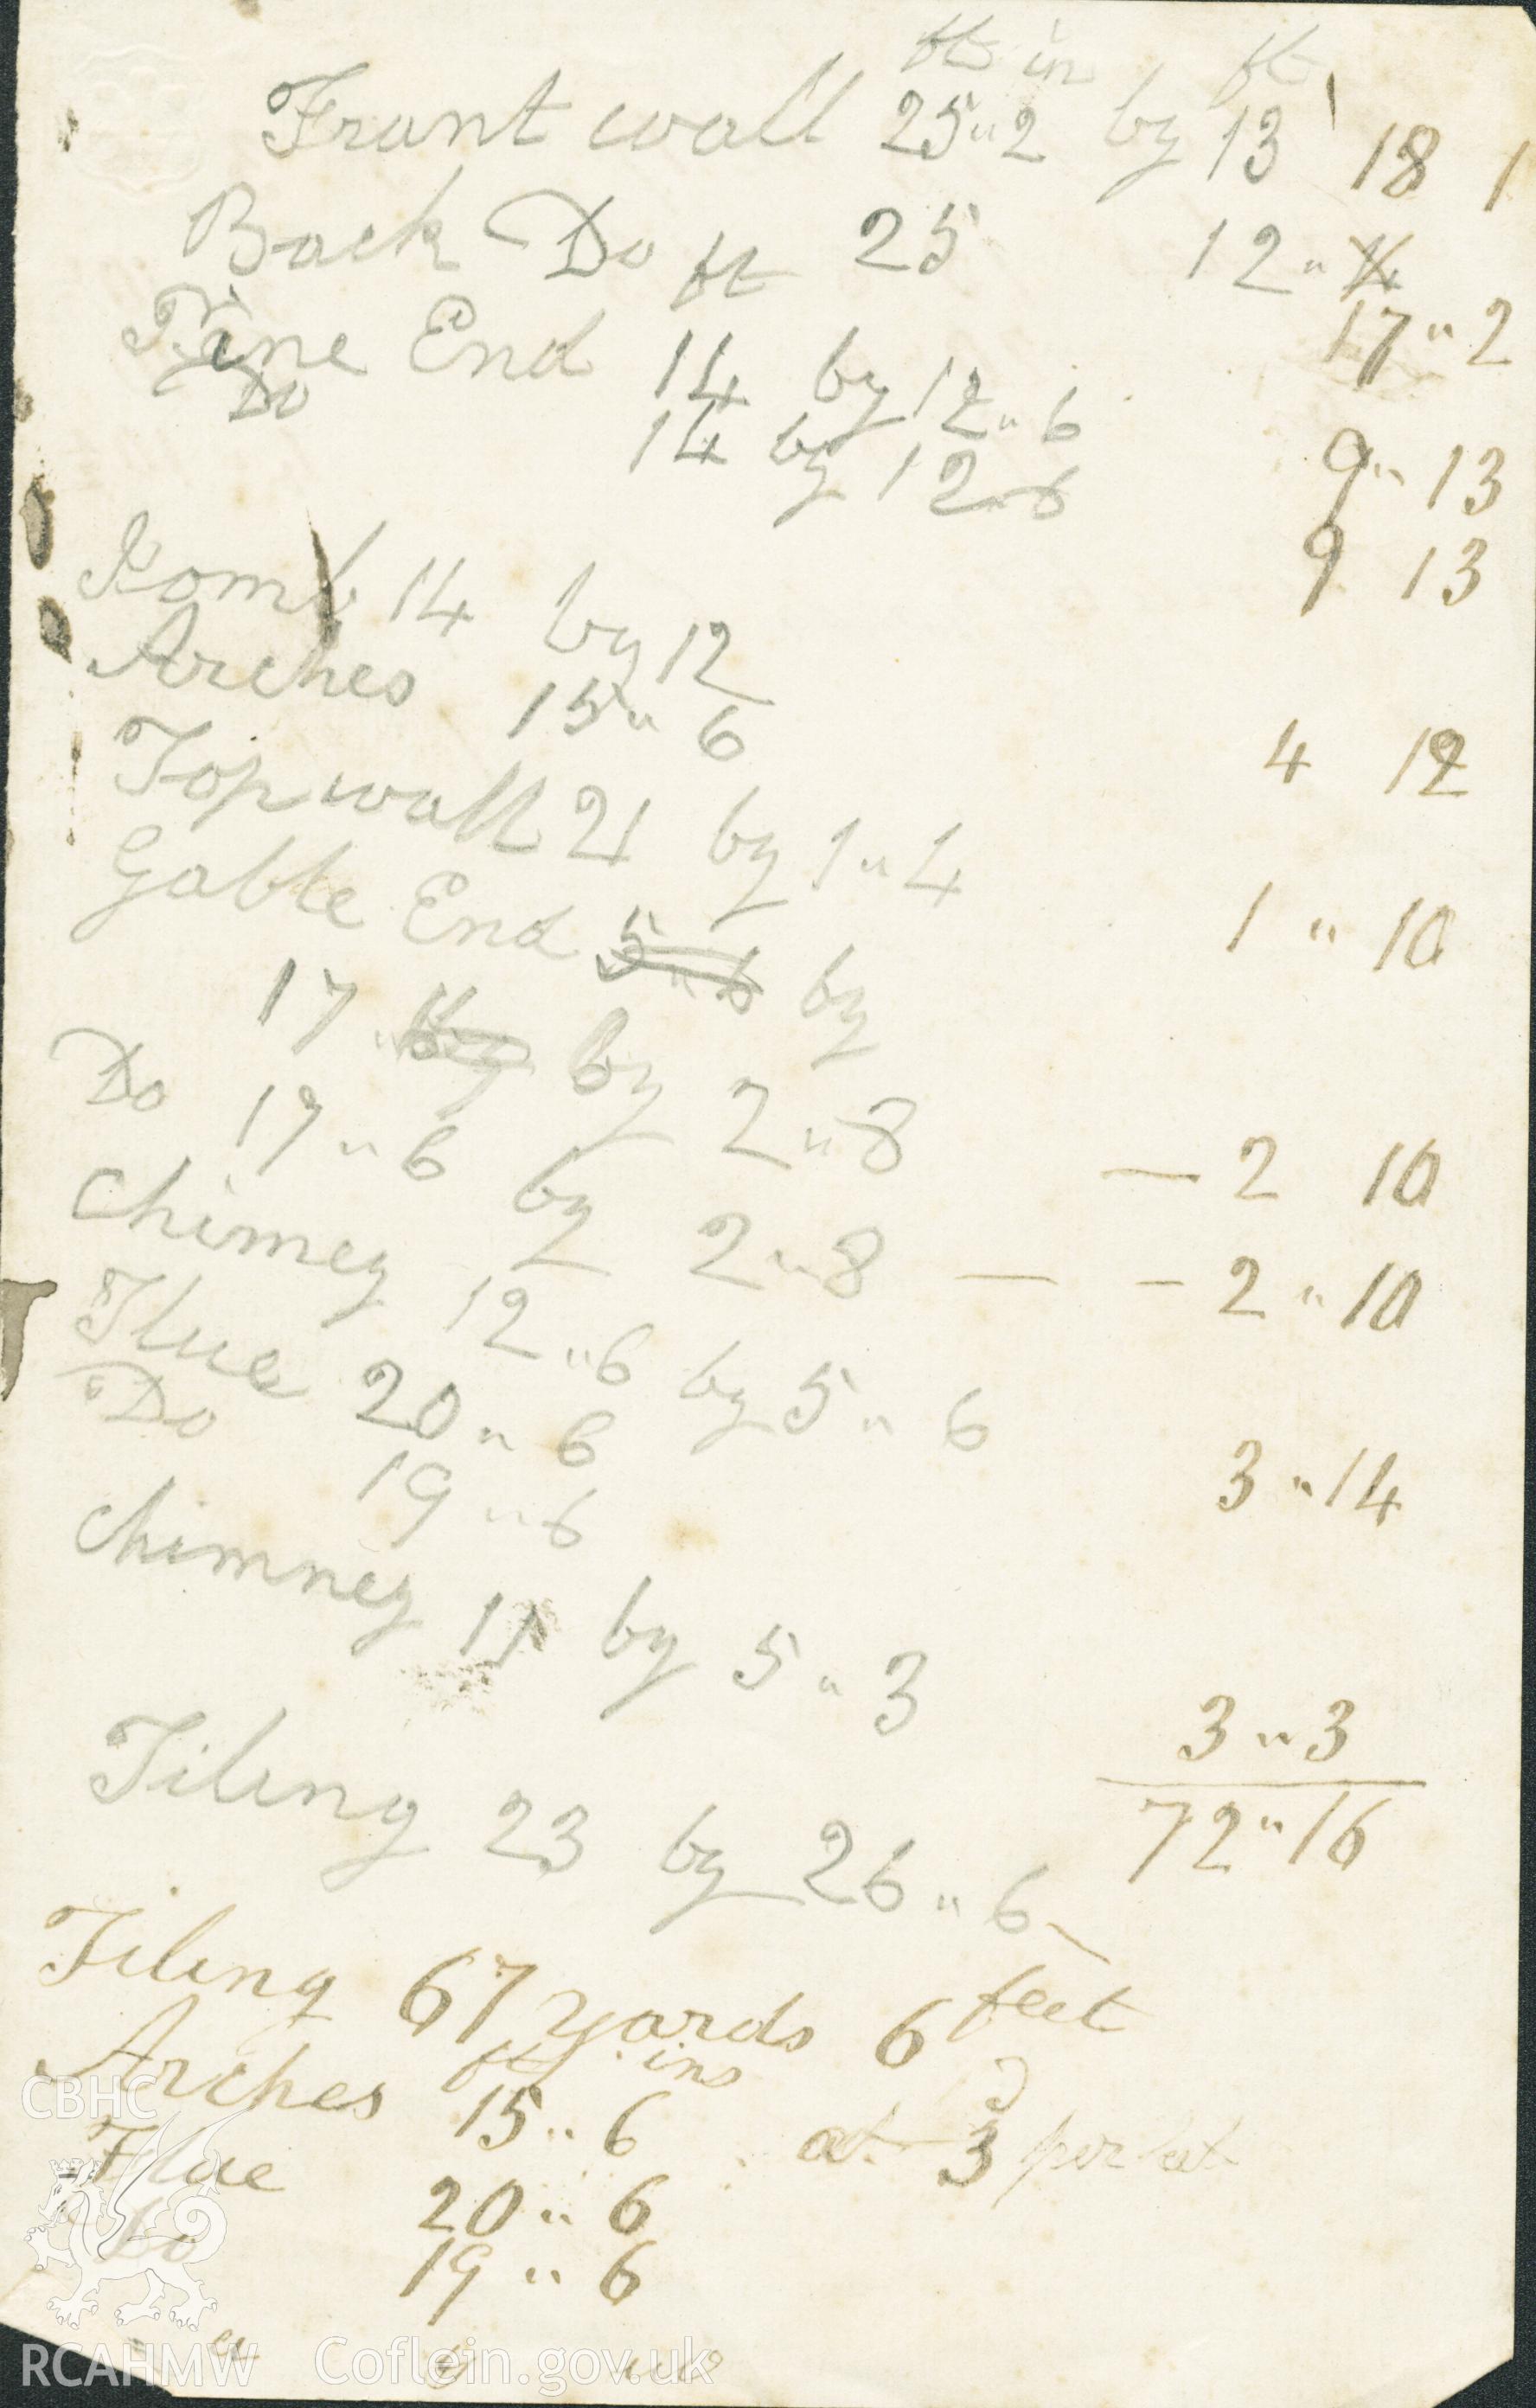 Undated handwritten text. Possibly a receipt. Donated to the RCAHMW during the Digital Dissent Project.